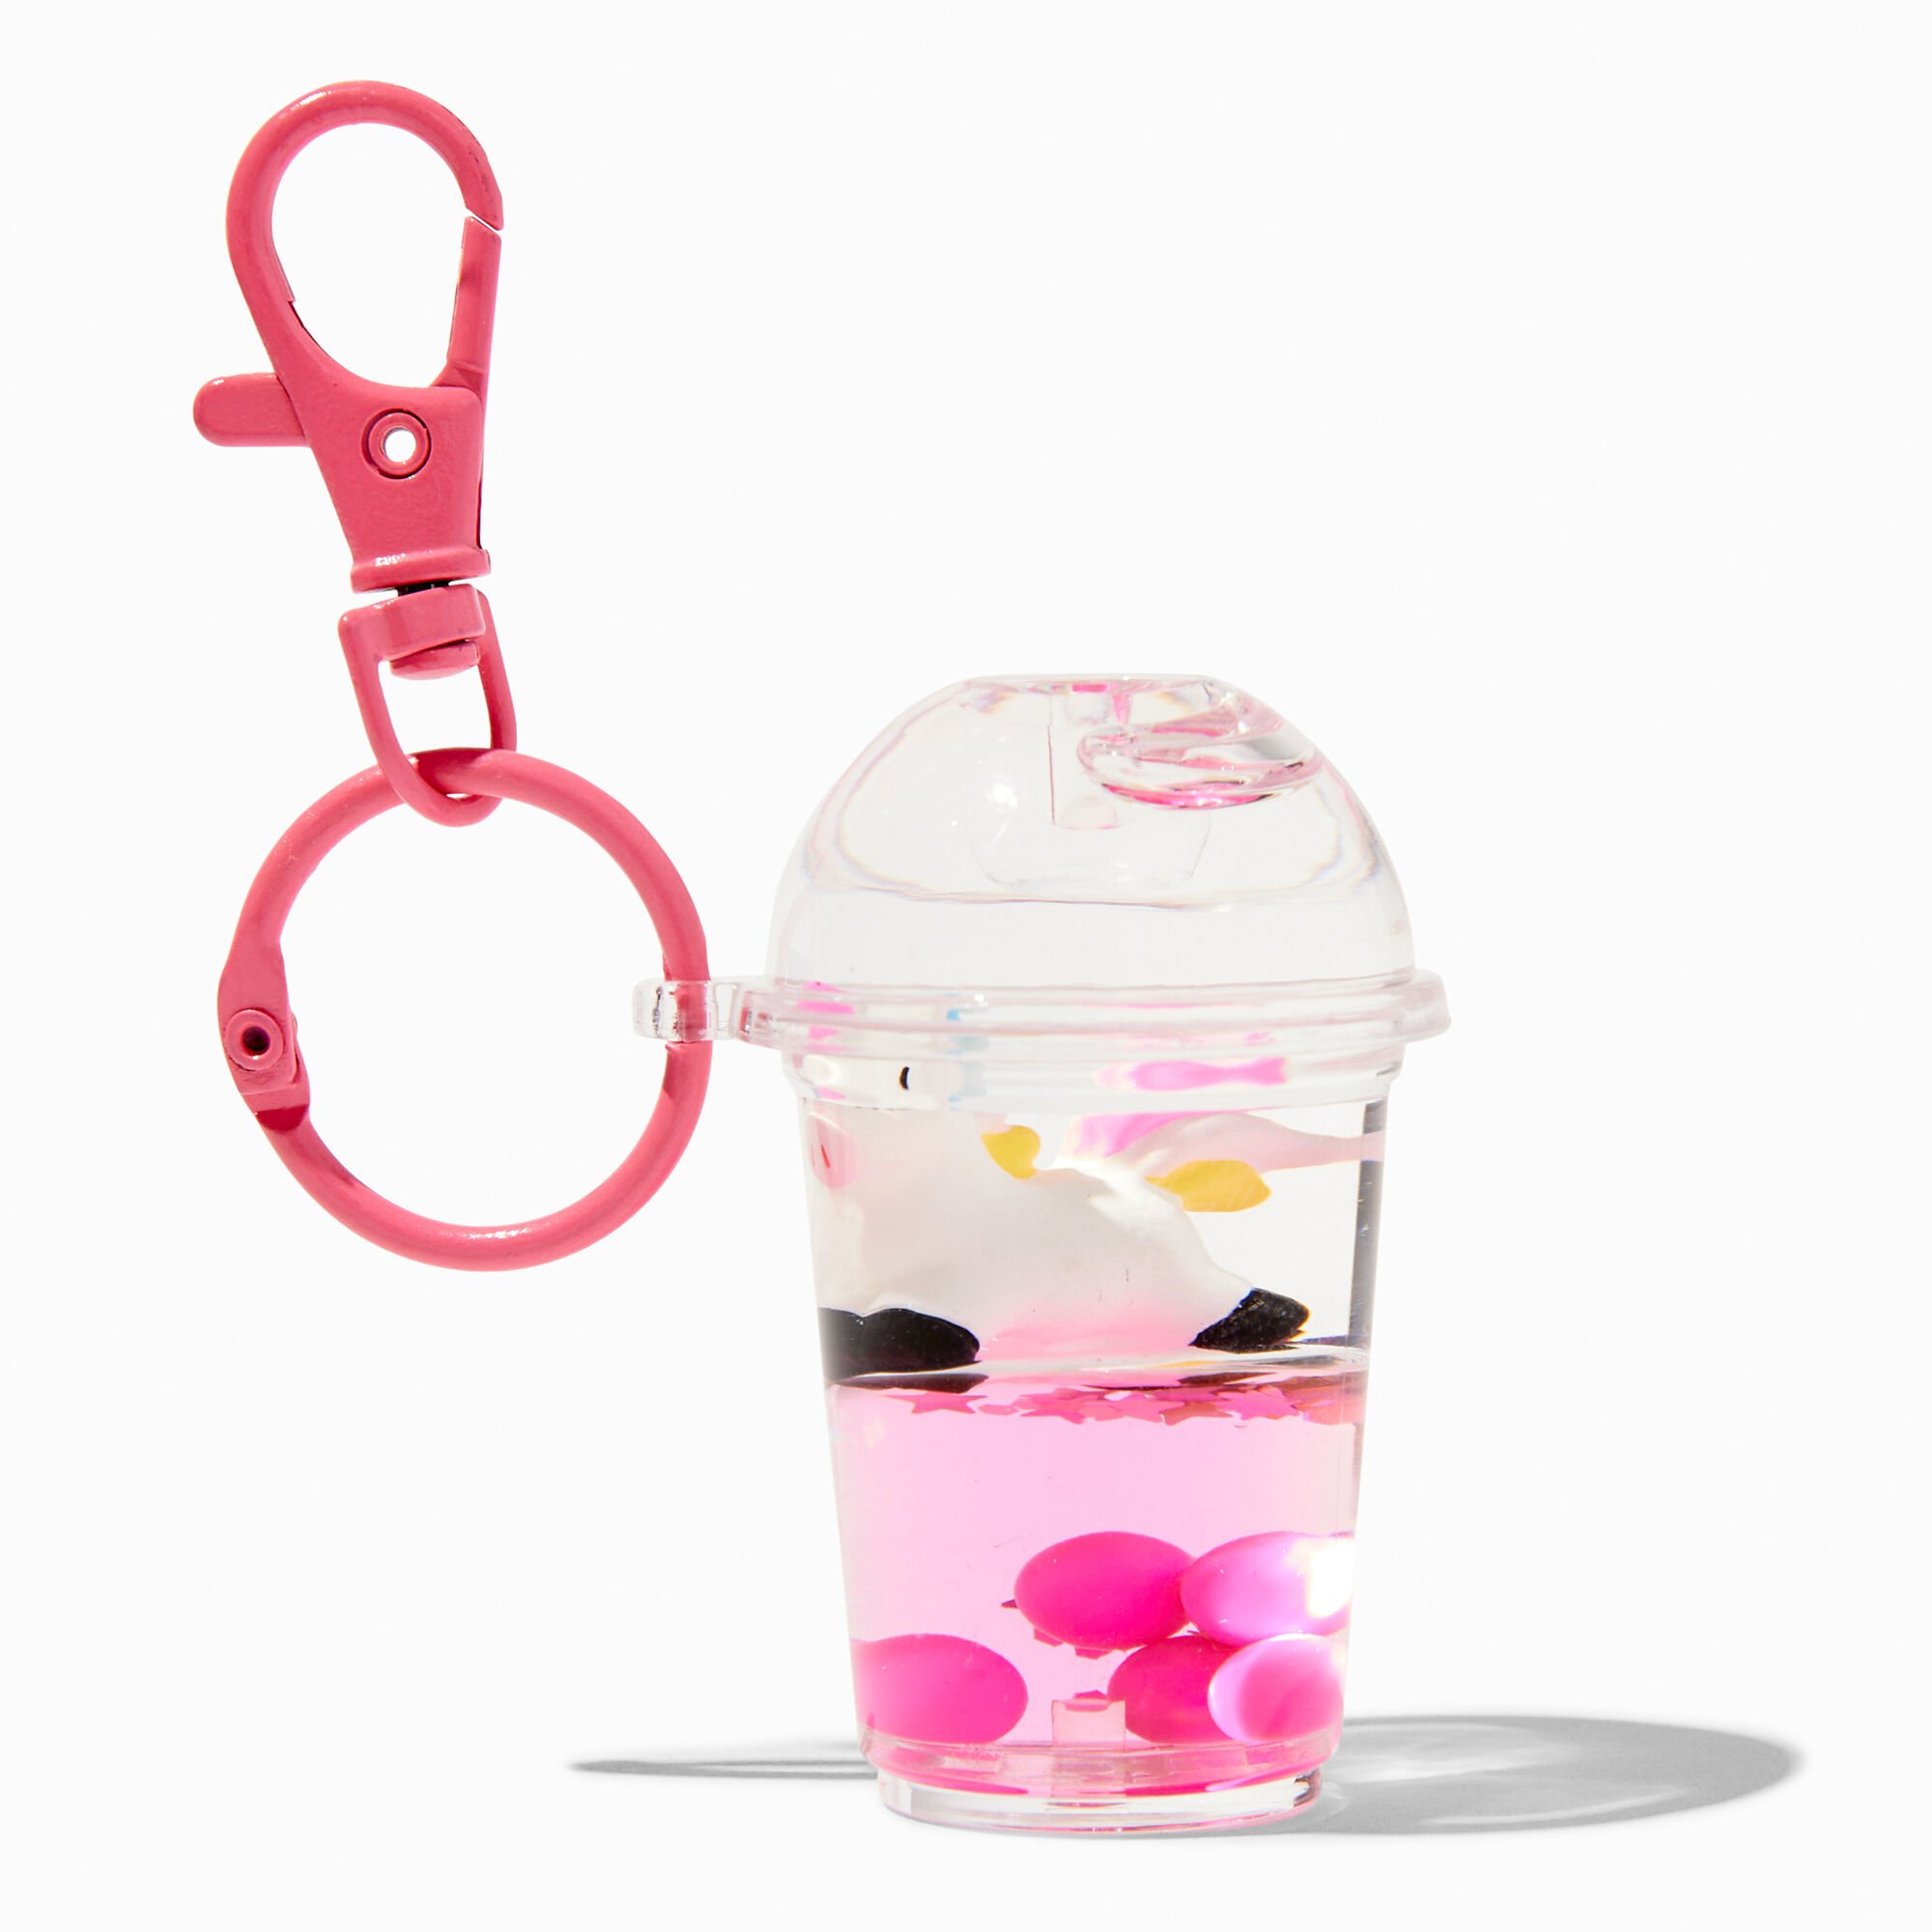 View Claires Unicorn Tea WaterFilled Glitter Keyring information